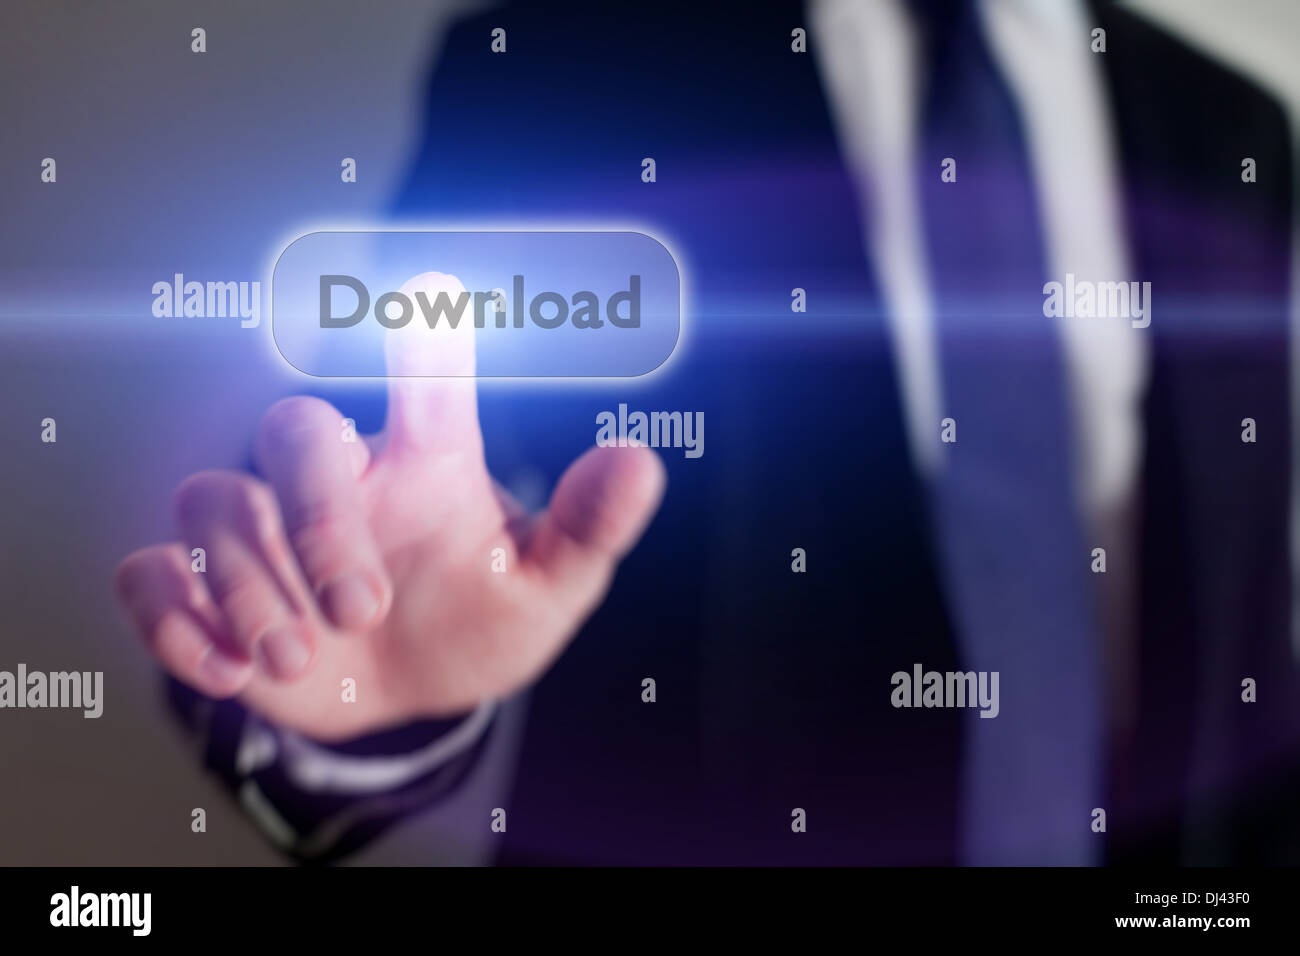 Download button Stock Photo